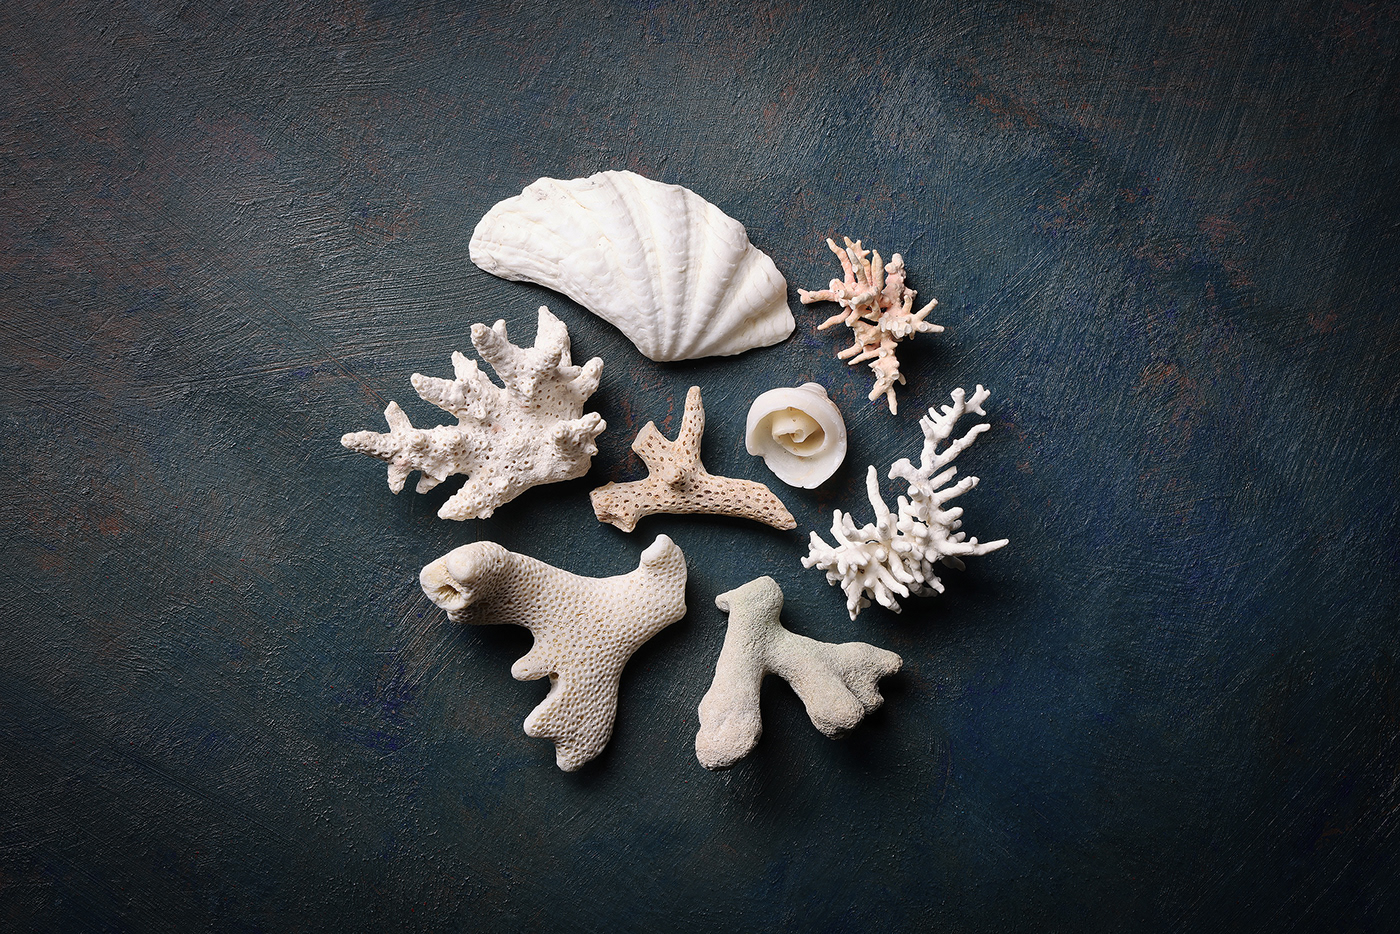 Collection composition corals Nature reef sea shells still life still life photography underwater